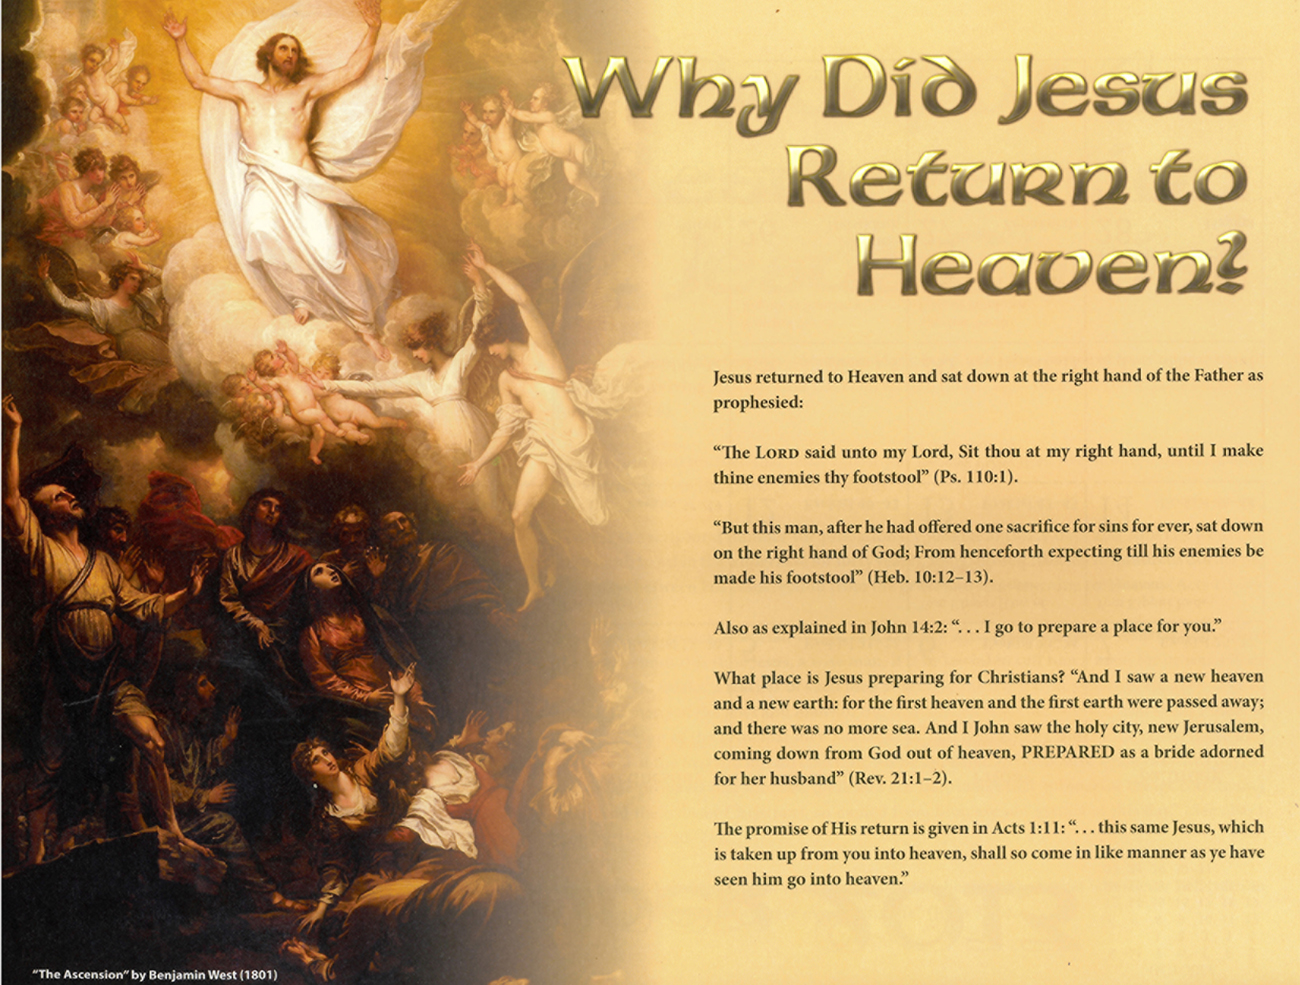 2013 Prophecy Calendar: October - Why Did Jesus Return to Heaven